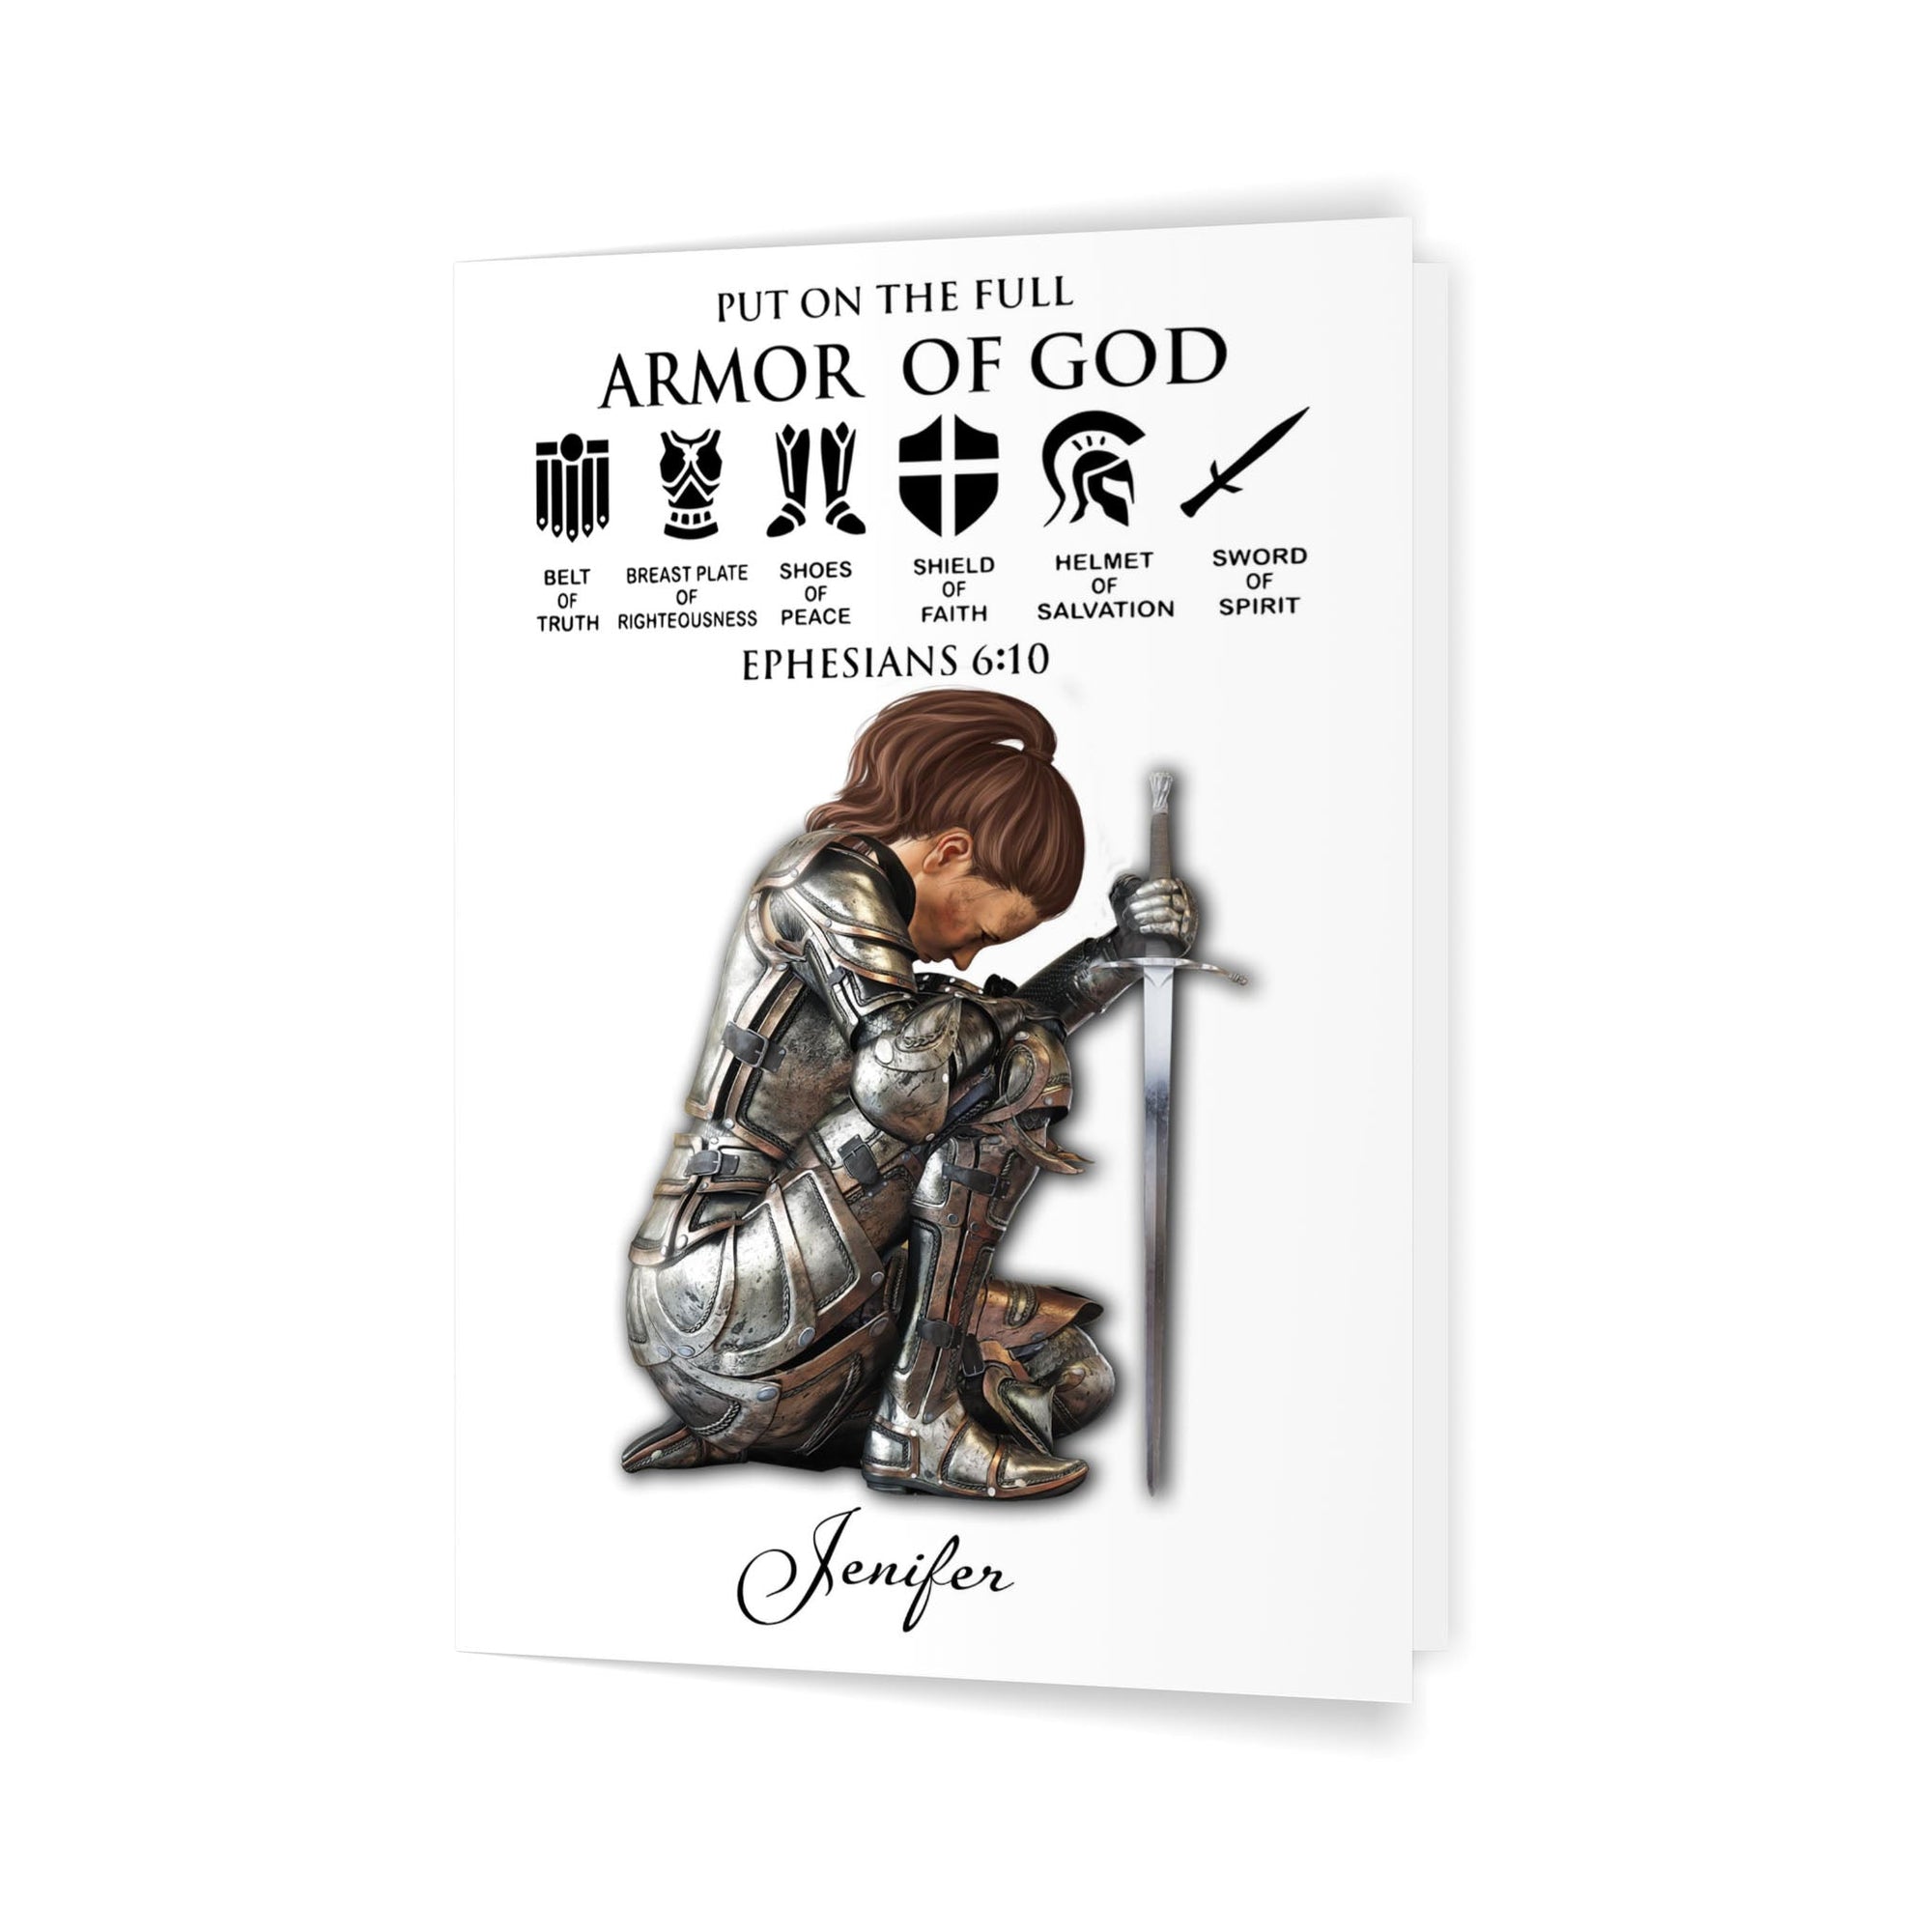 Personalized Custom Name, Skin Tone And Hairstyles Woman Warrior of God Put On The Full Armor of God Ephesians 6-10 Folded Greeting Card